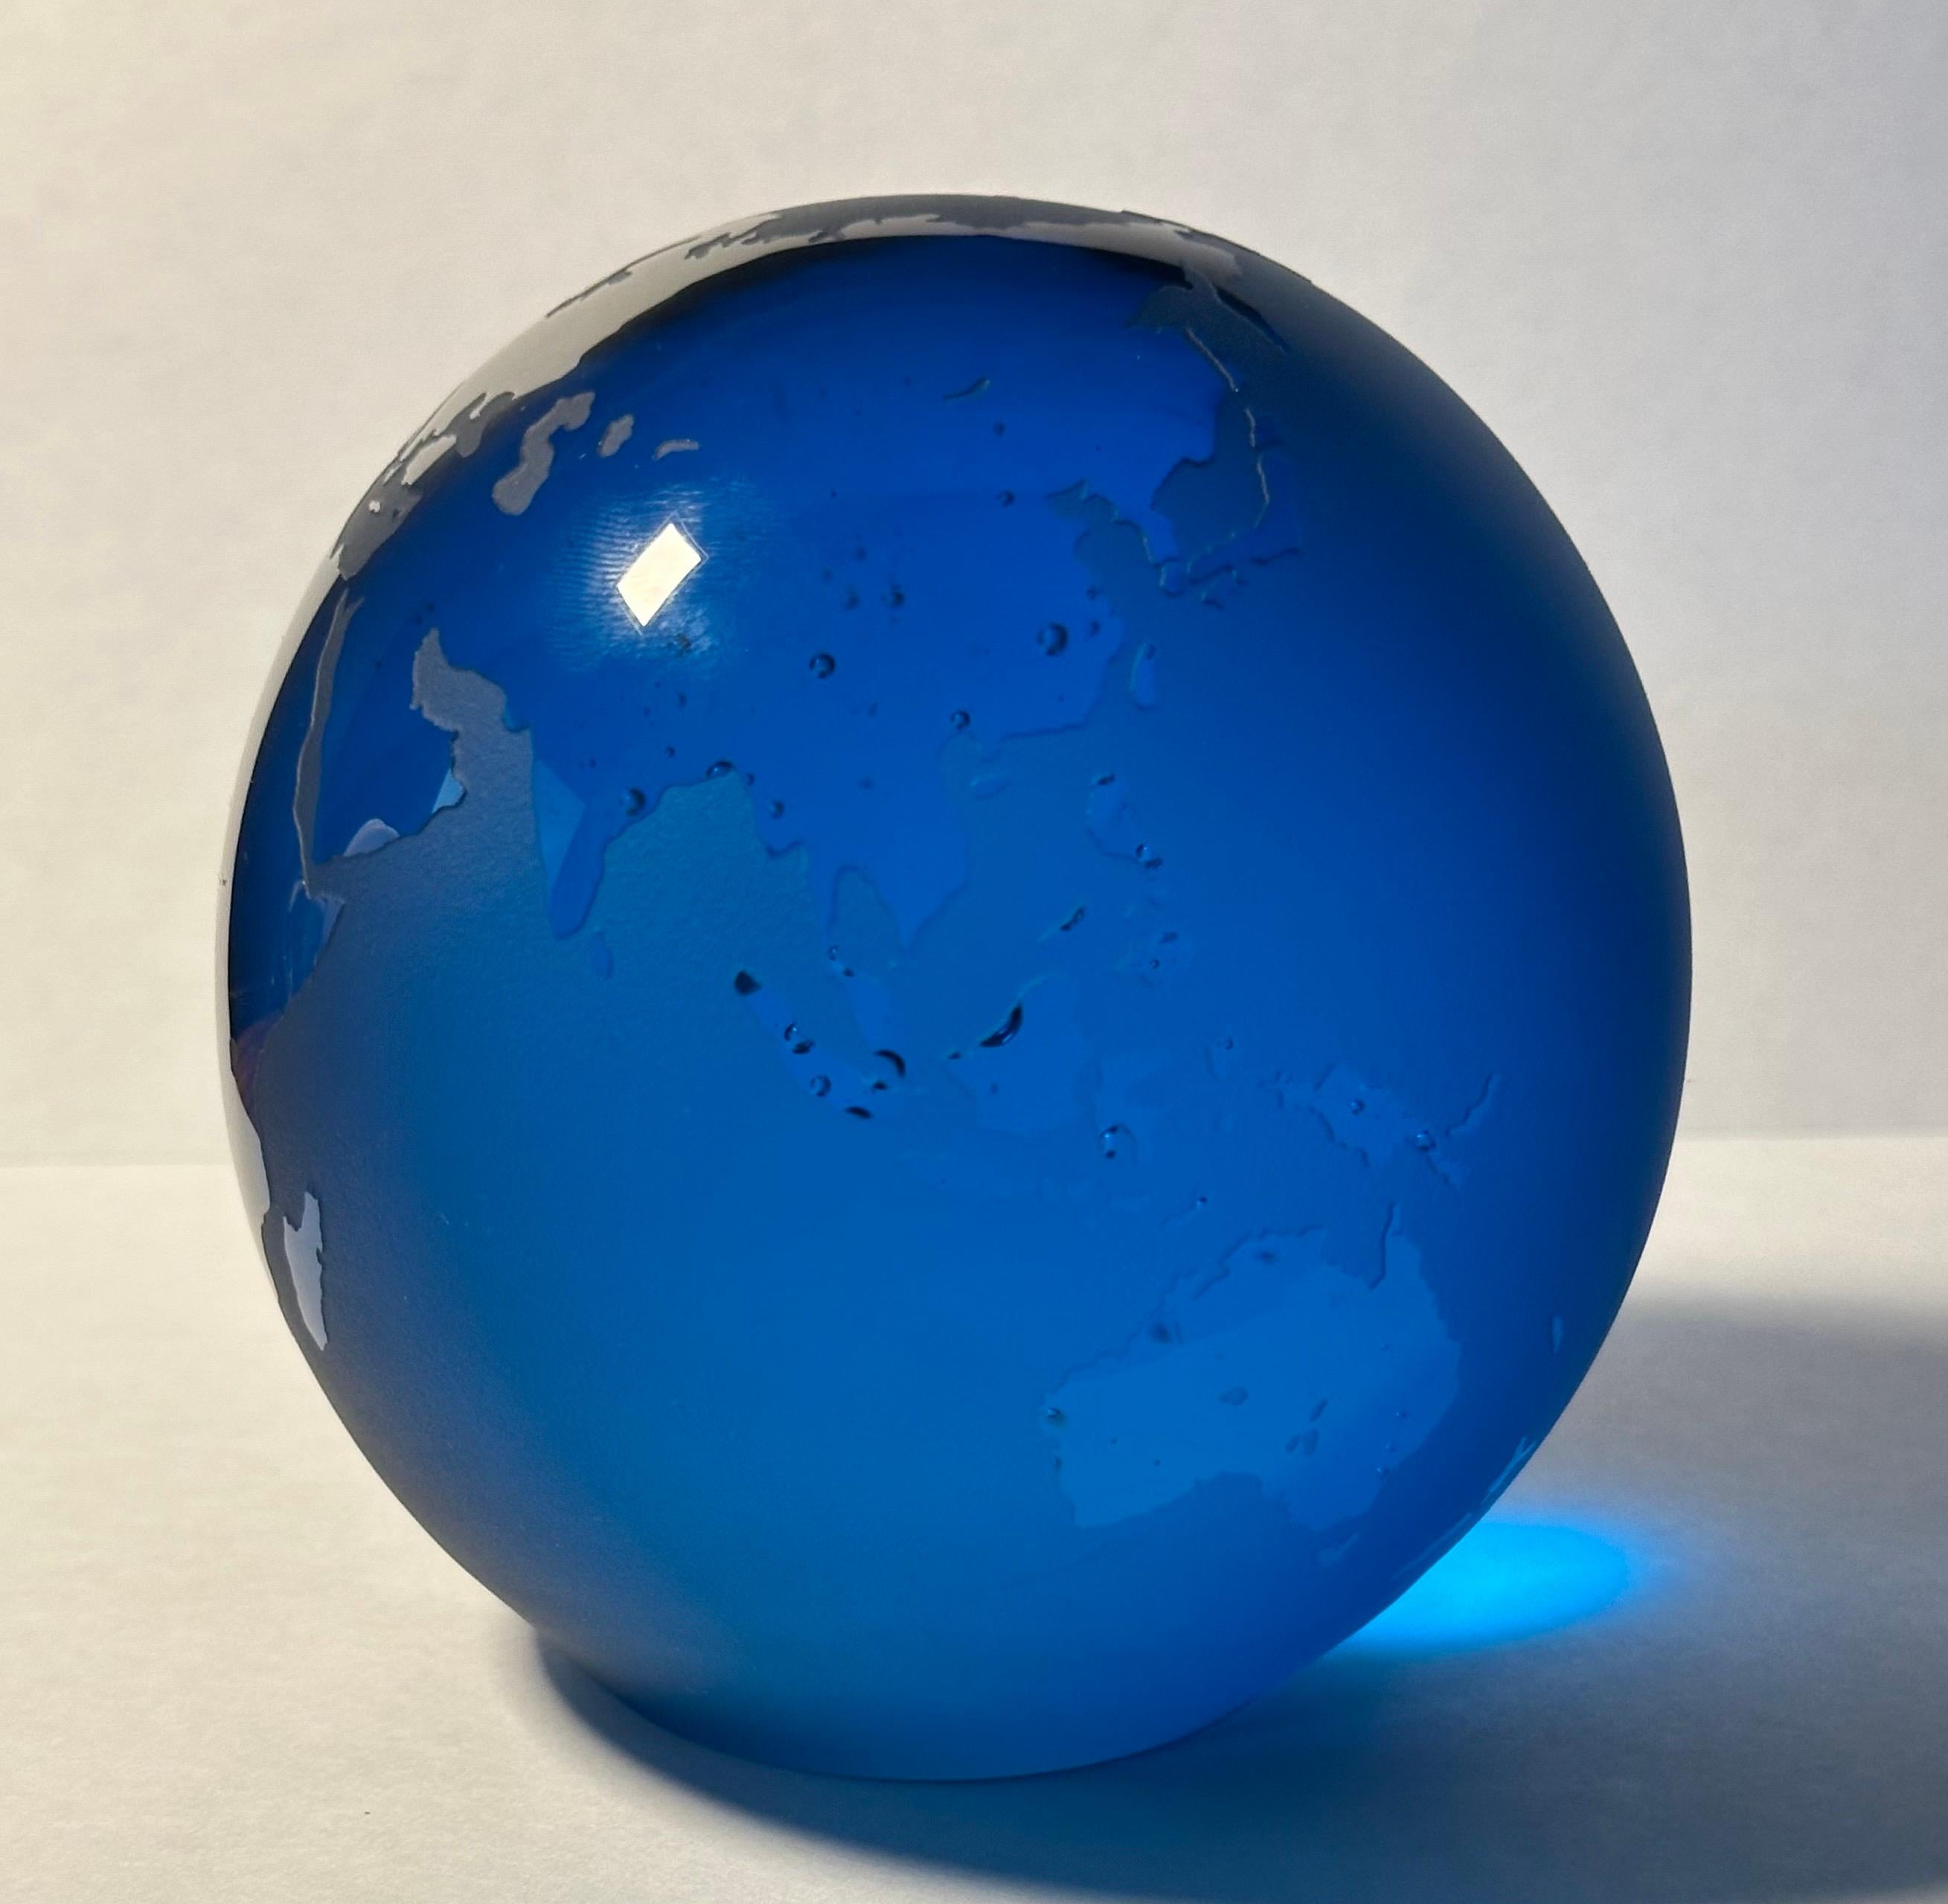 World Globe Art Glass Paperweight by Steven Correia In Good Condition For Sale In San Diego, CA